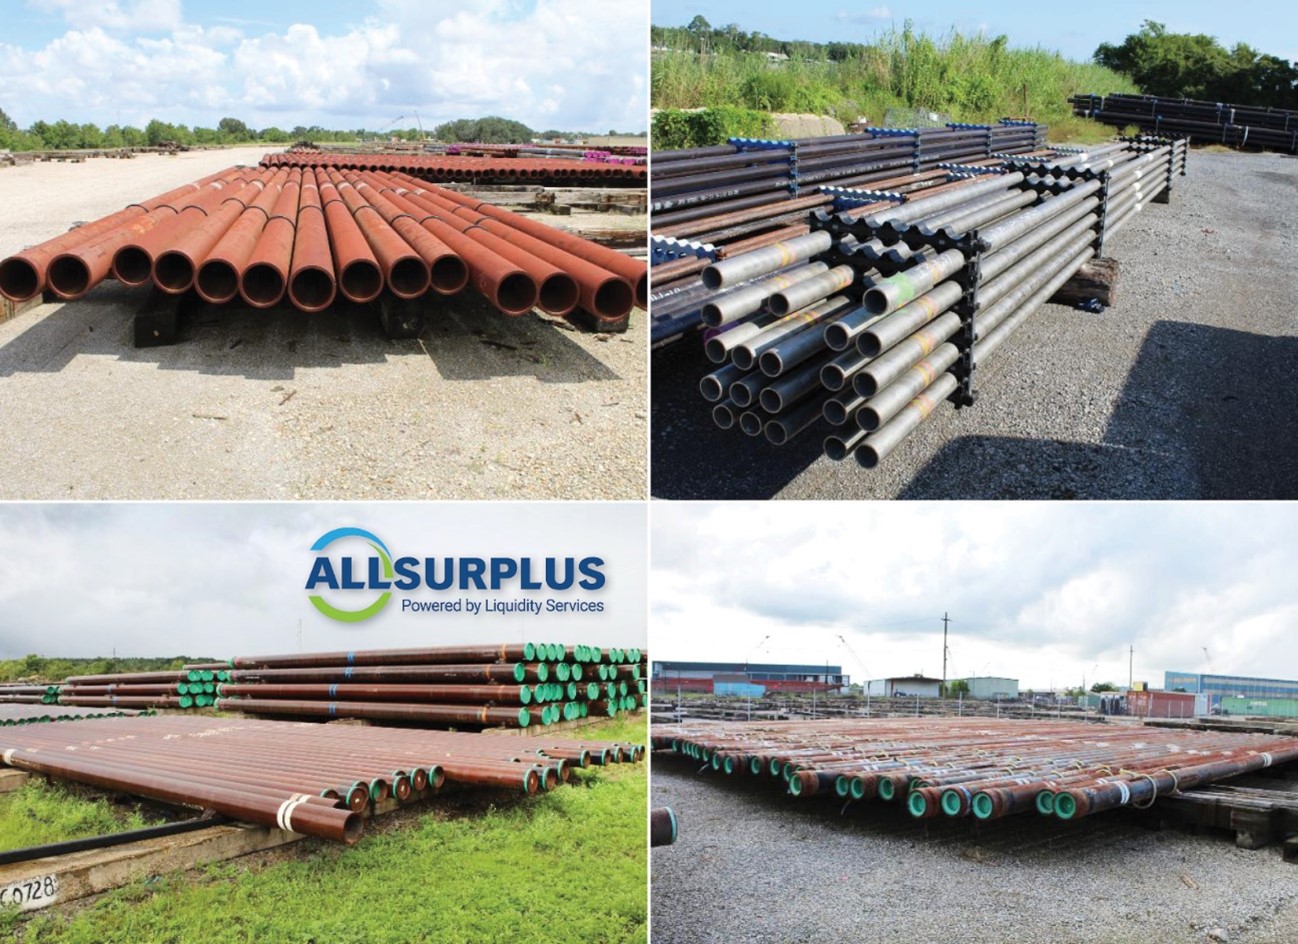 AllSurplus Selected to Conduct Online Auction of Surplus Offshore Oil and Gas Equipment for Leading Energy Company